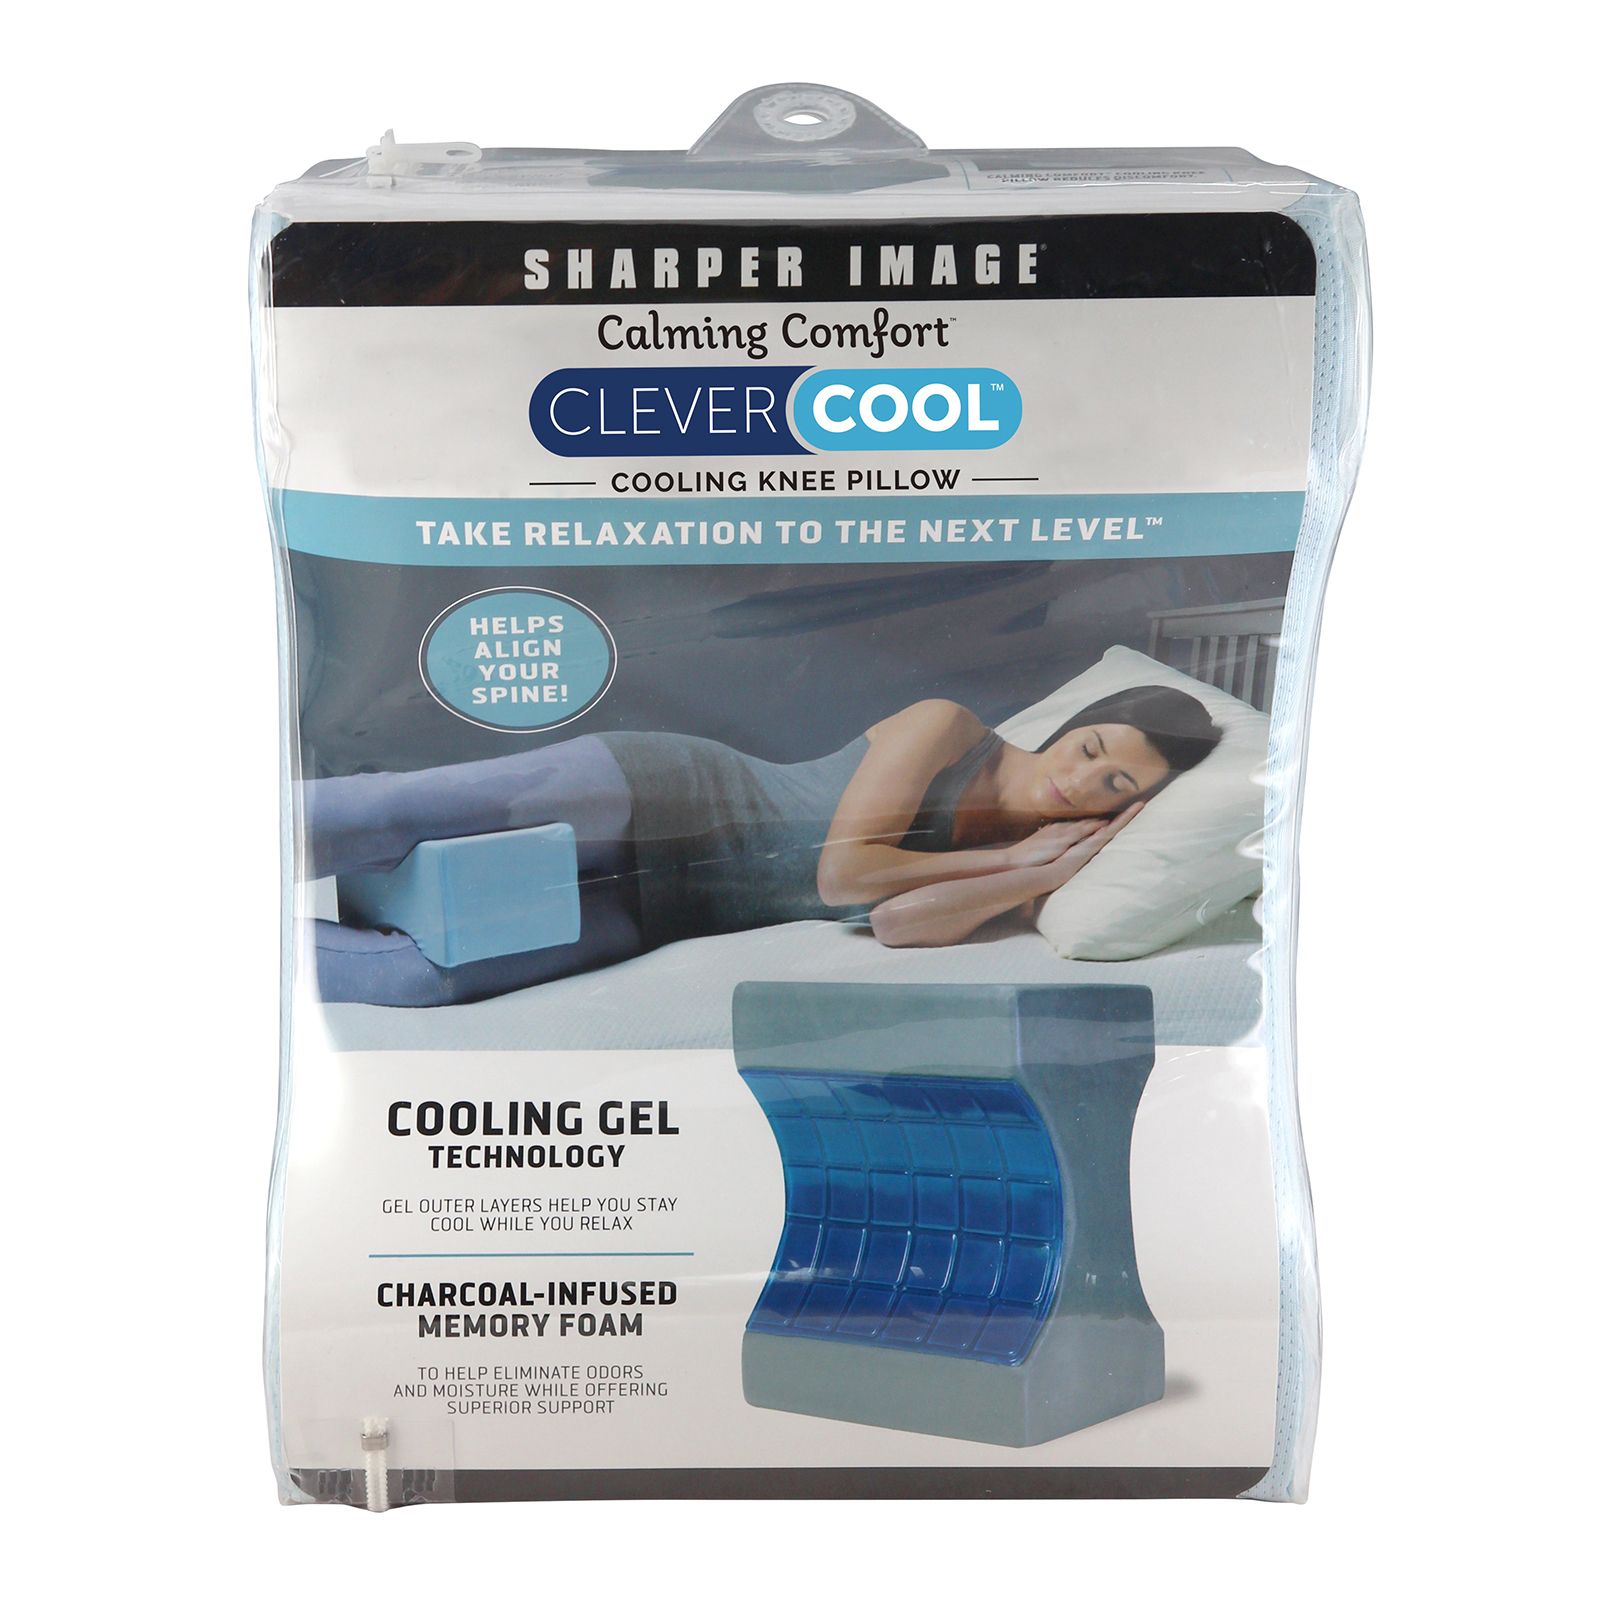 Loungeables Knee Pillow Comfort